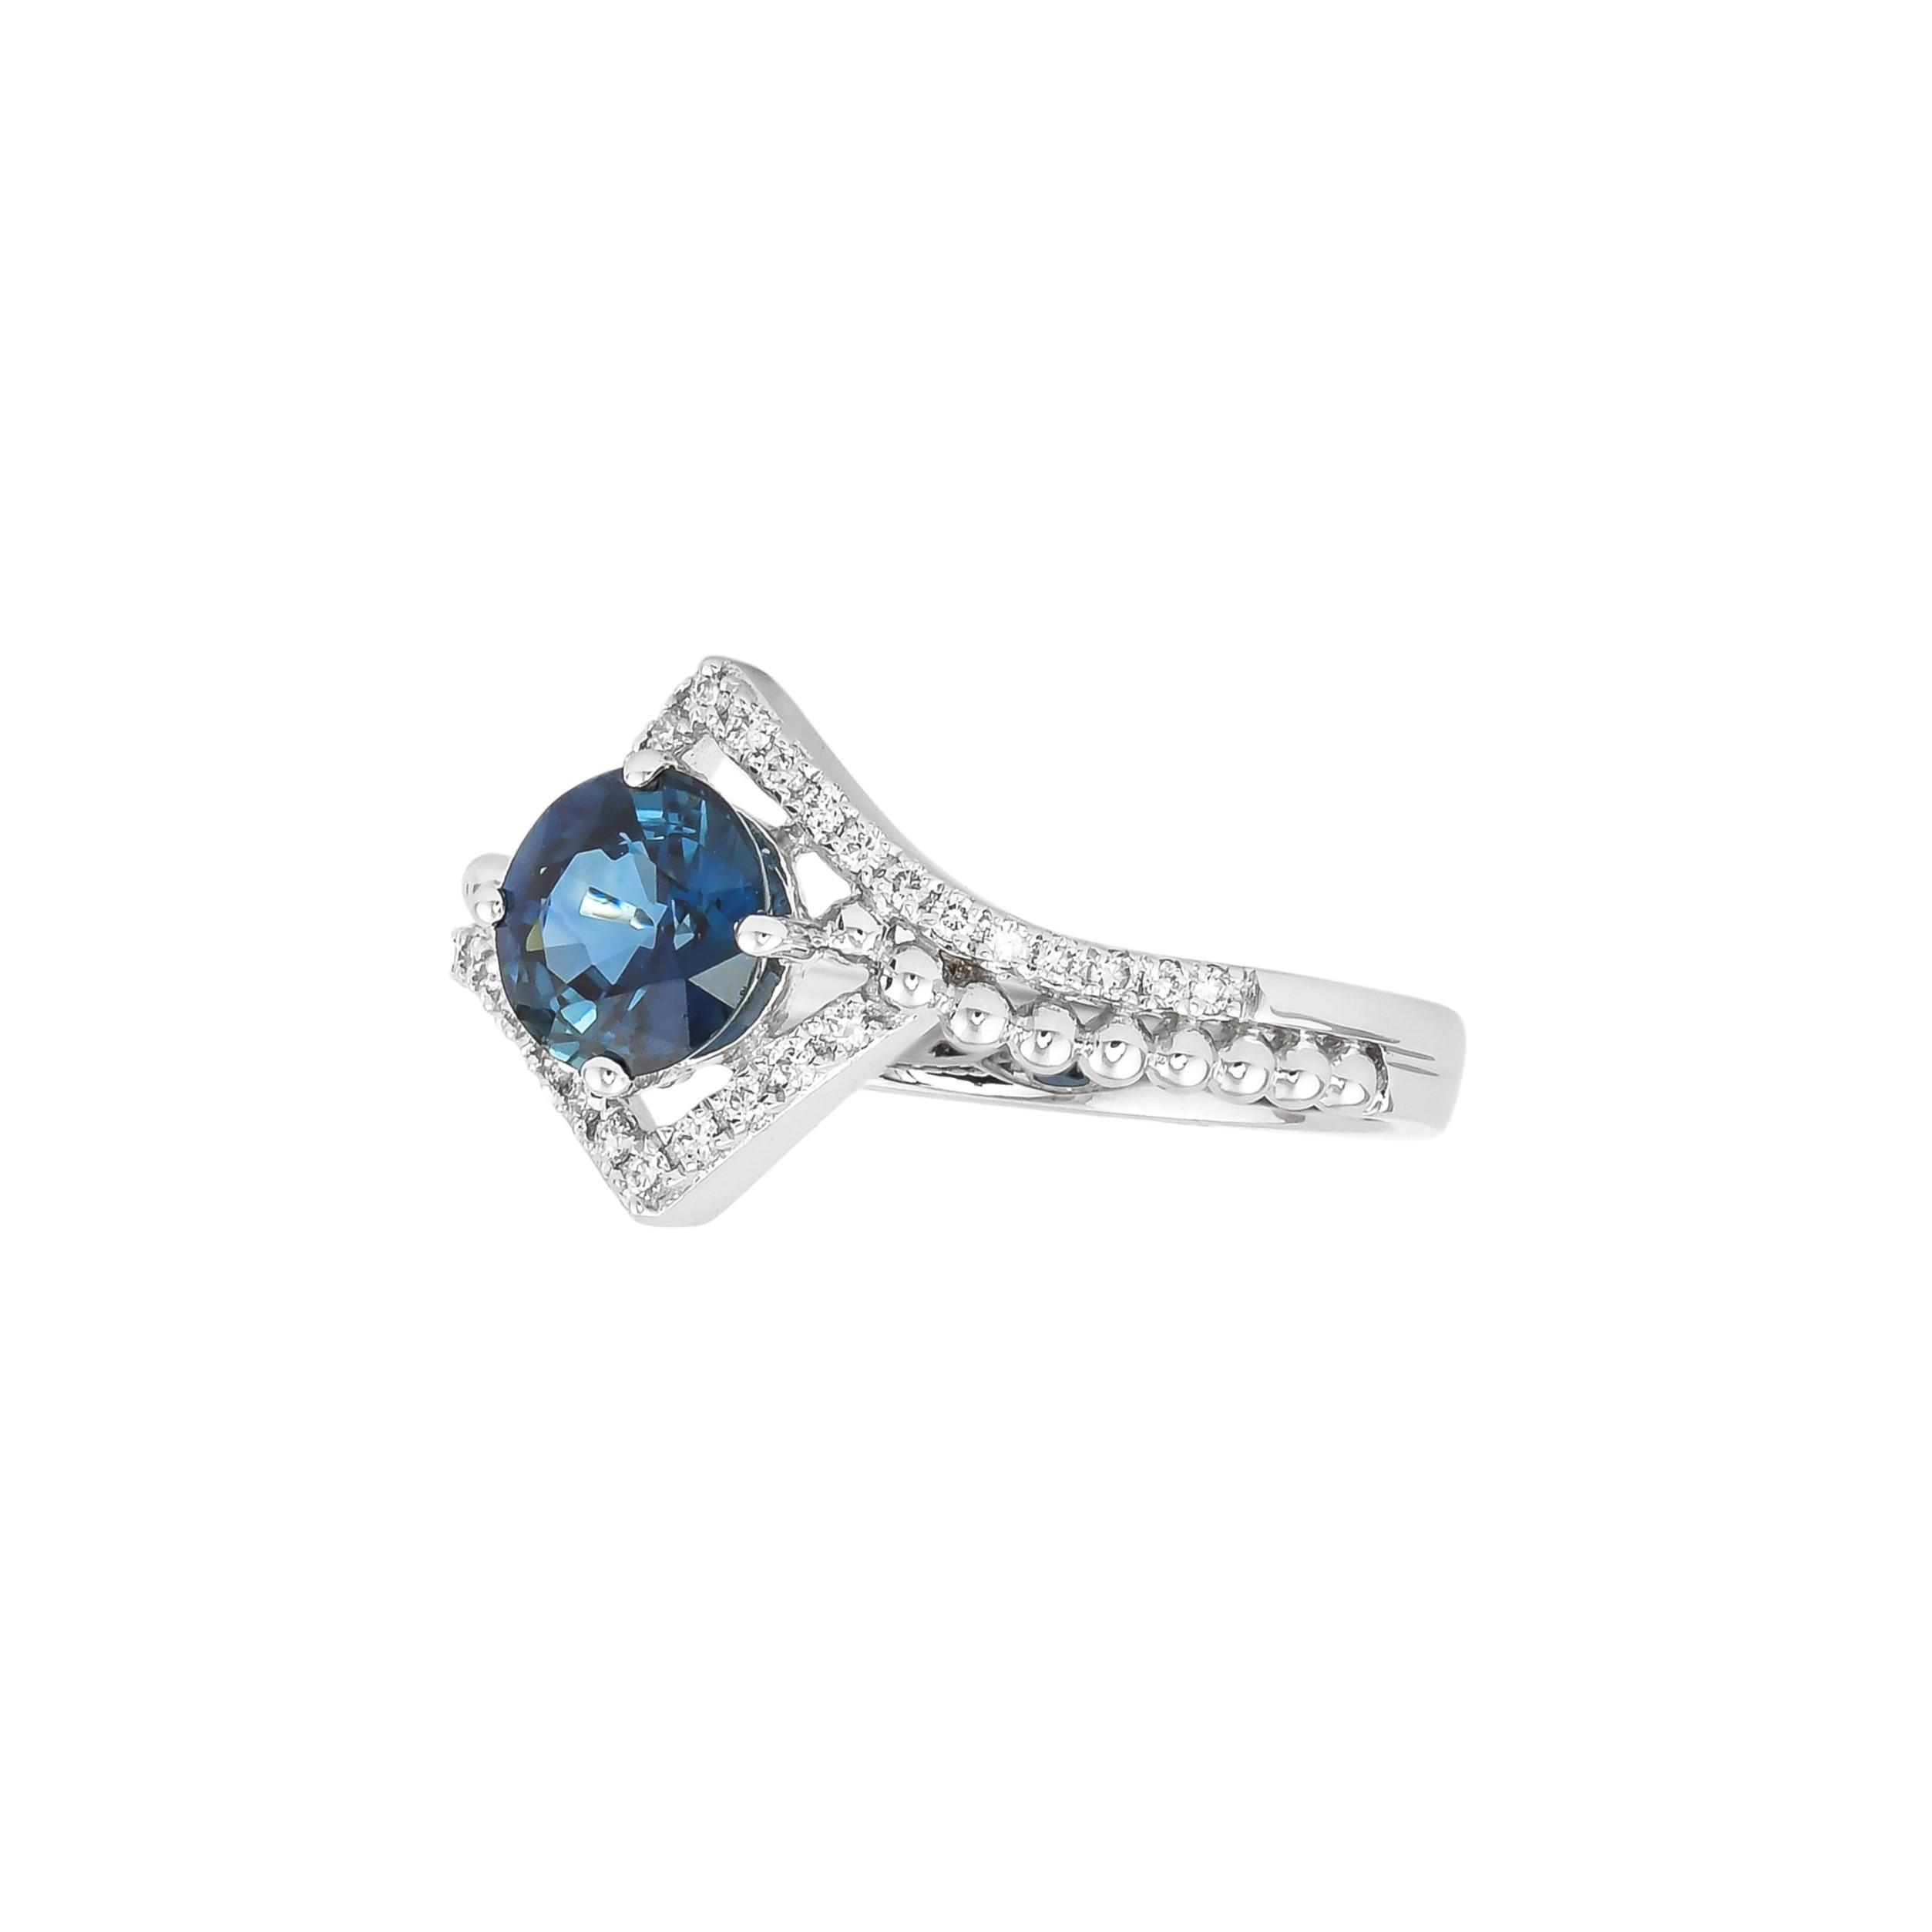 Contemporary 1.1 Carat Blue Sapphire and Diamond Ring in 18 Karat White Gold For Sale